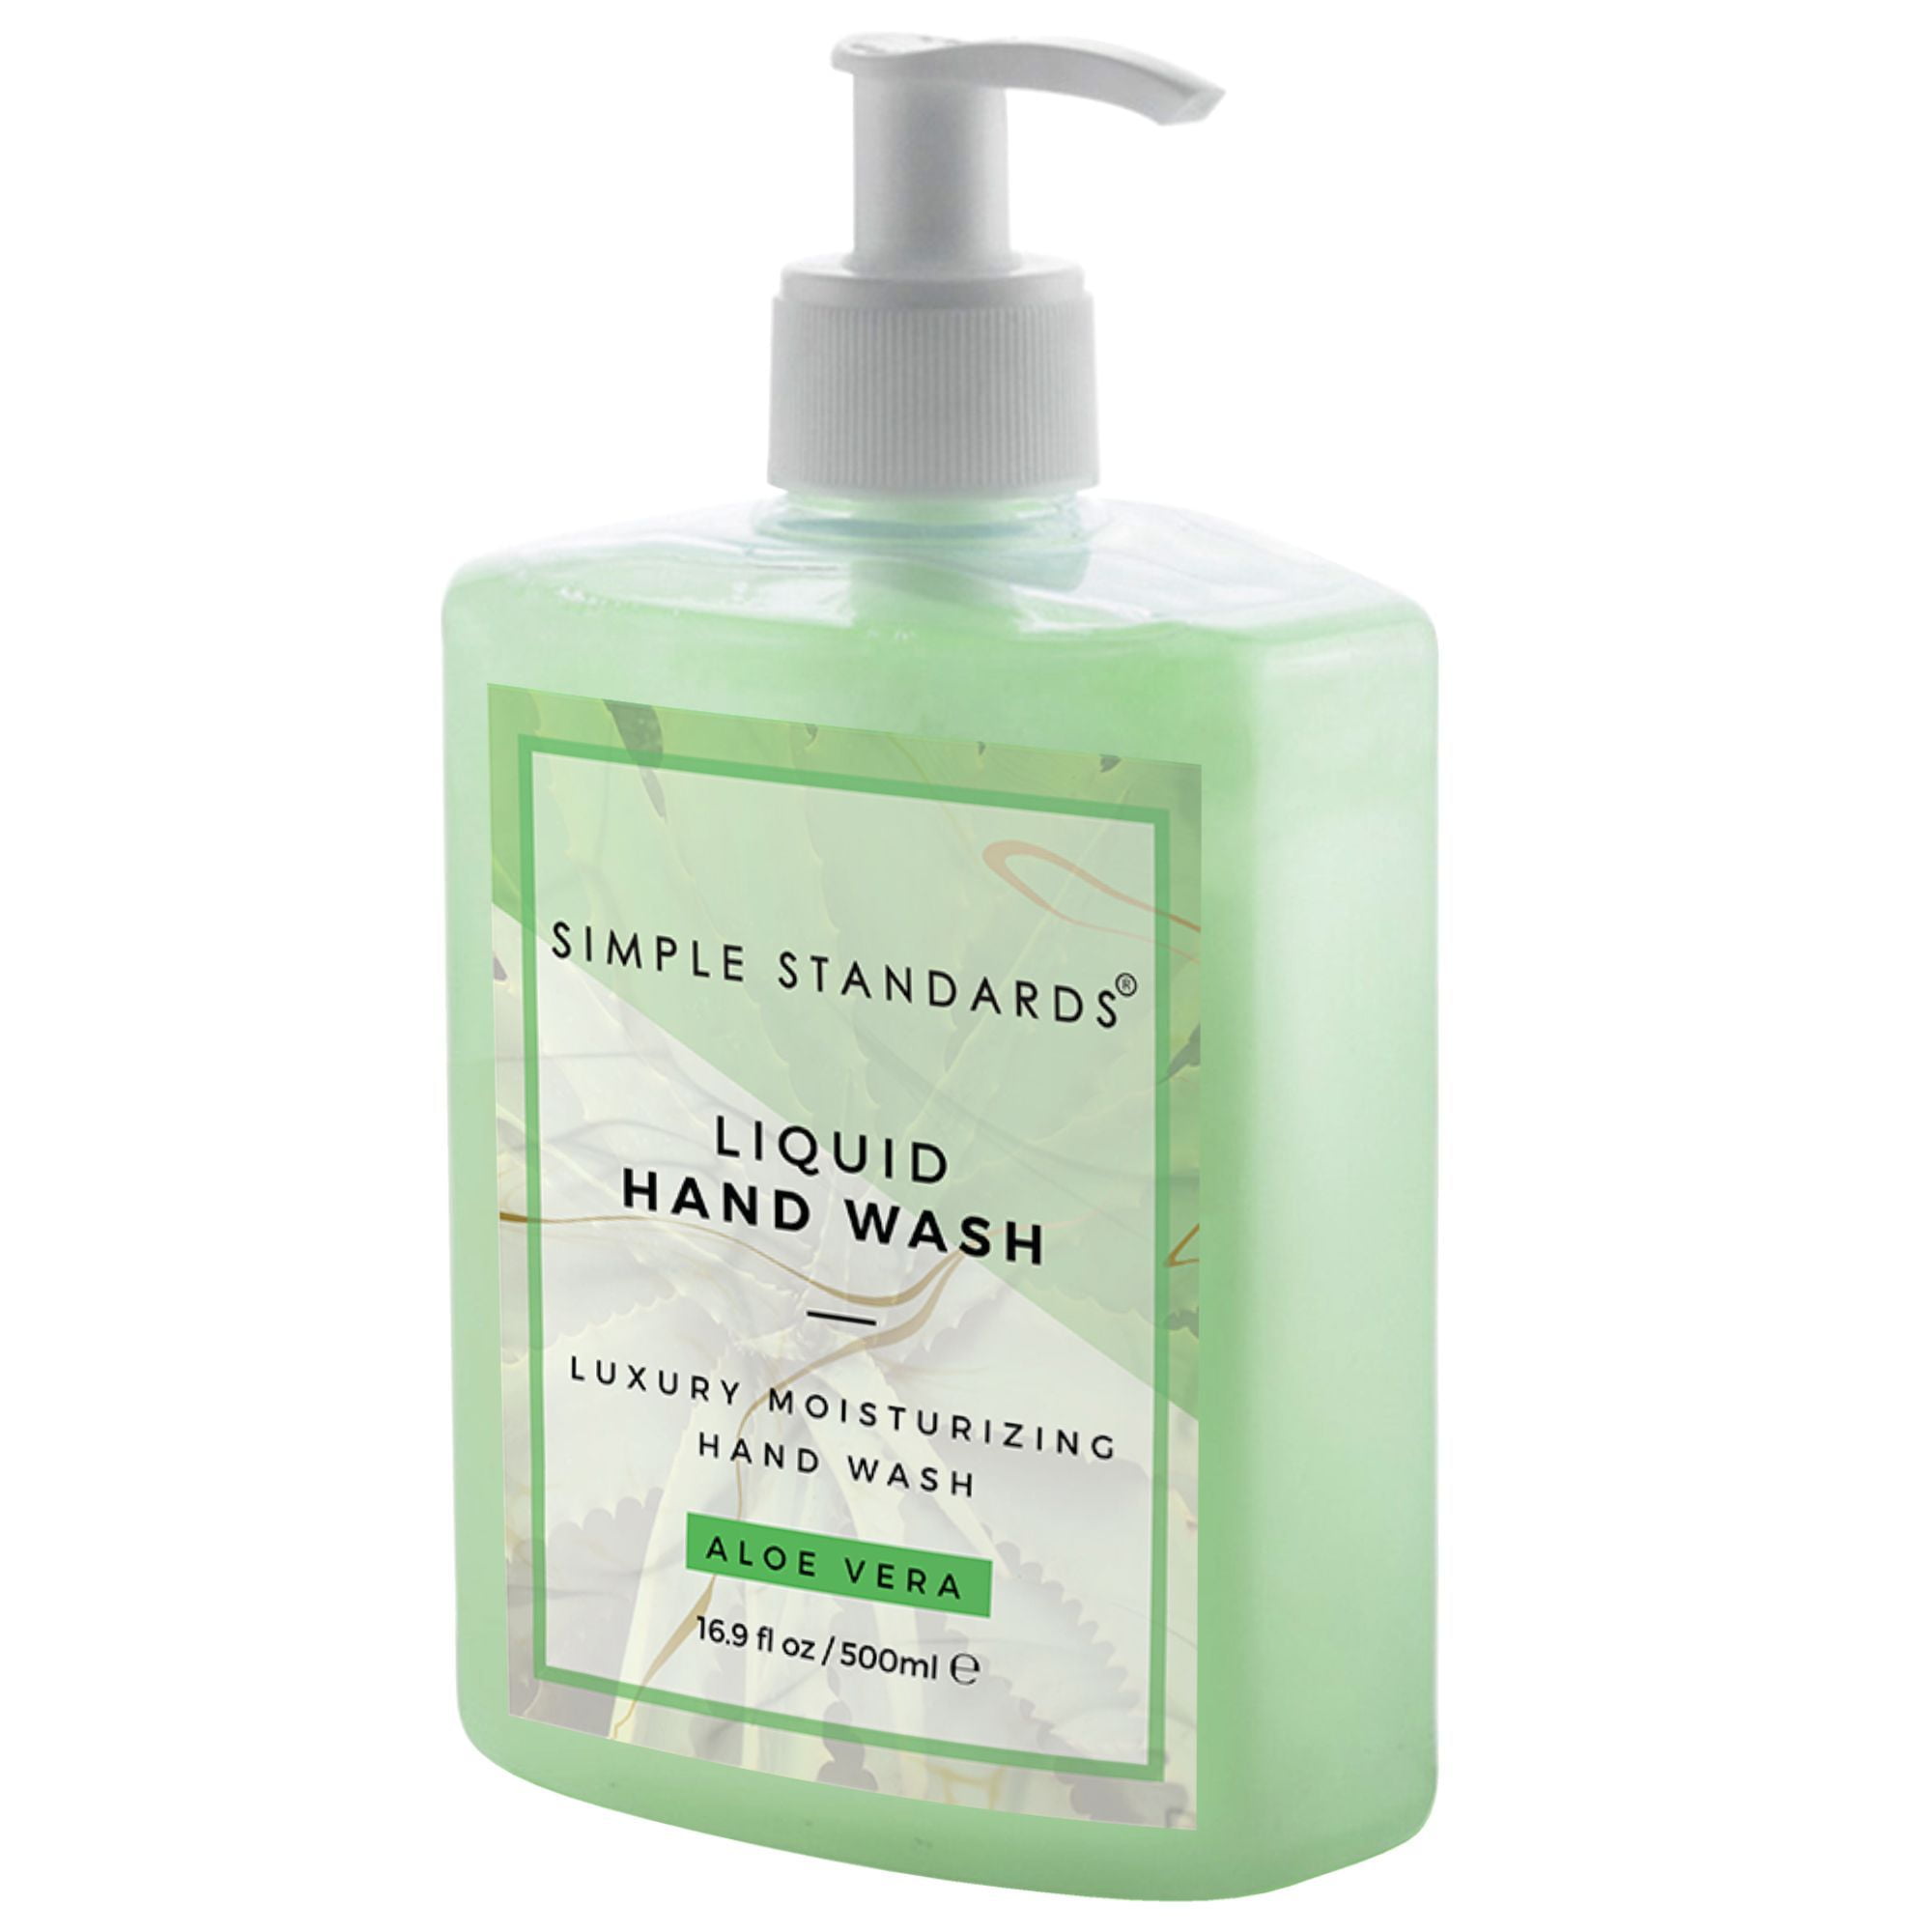 Highmark hand soap msds accenture nyc